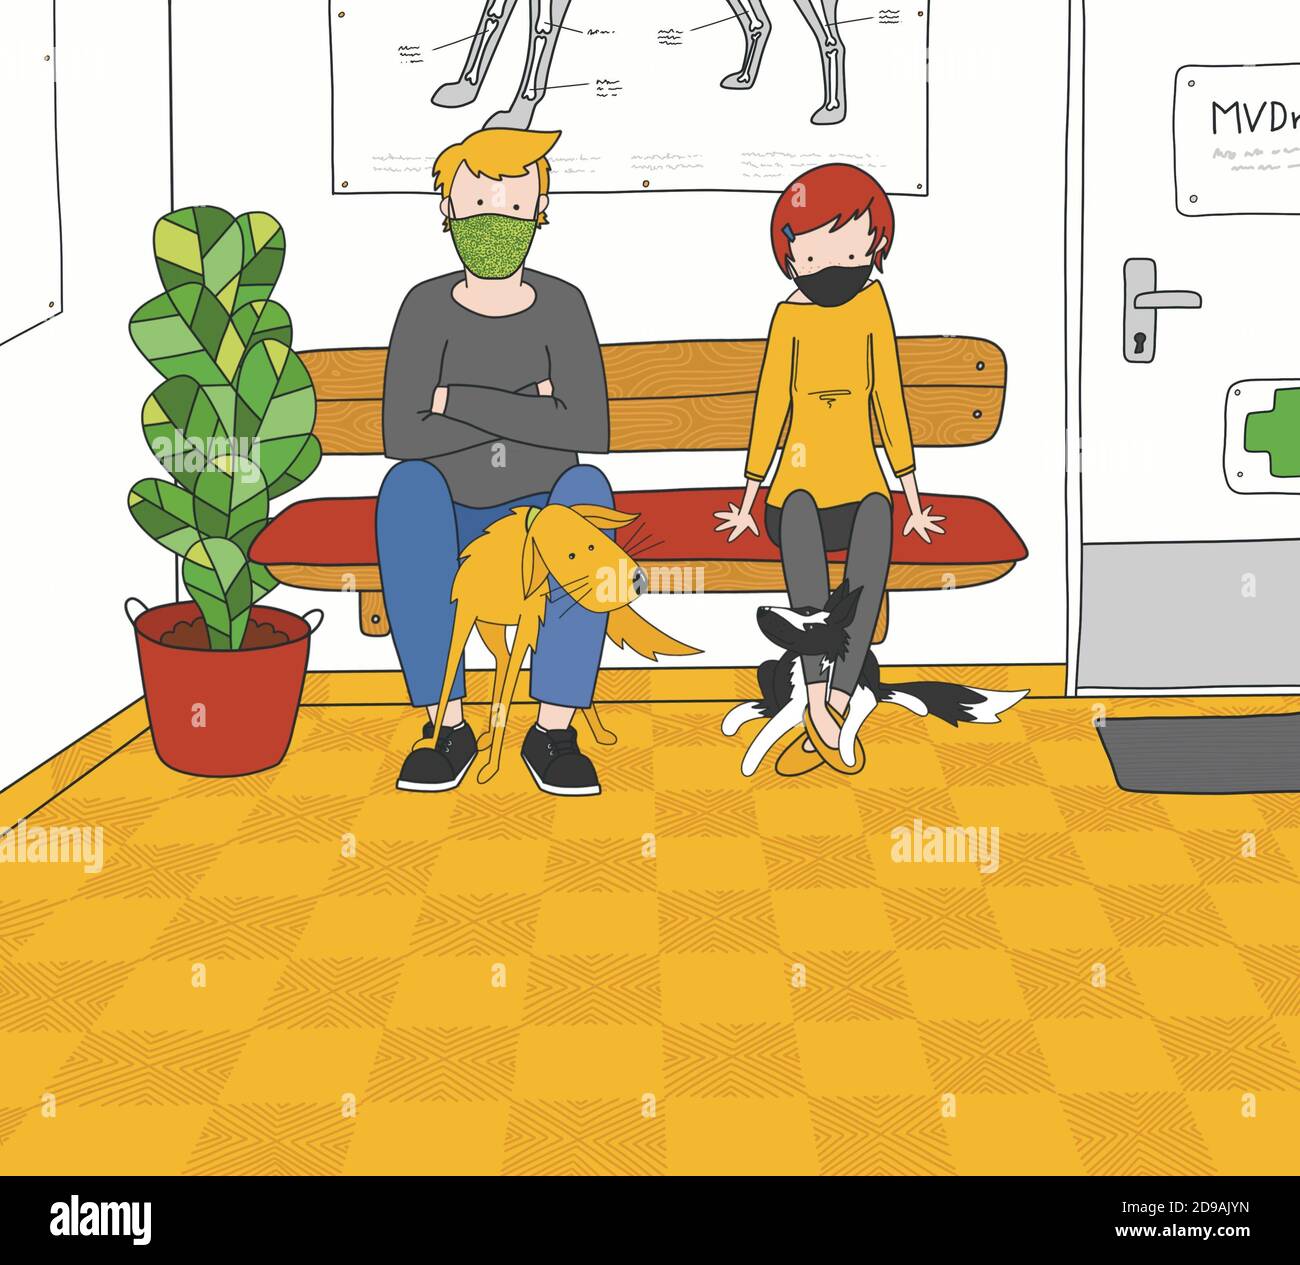 Illustration of young people waiting in veterinary waiting room with dogs. People wear cloth face mask as a prevention against coronavirus. Stock Photo